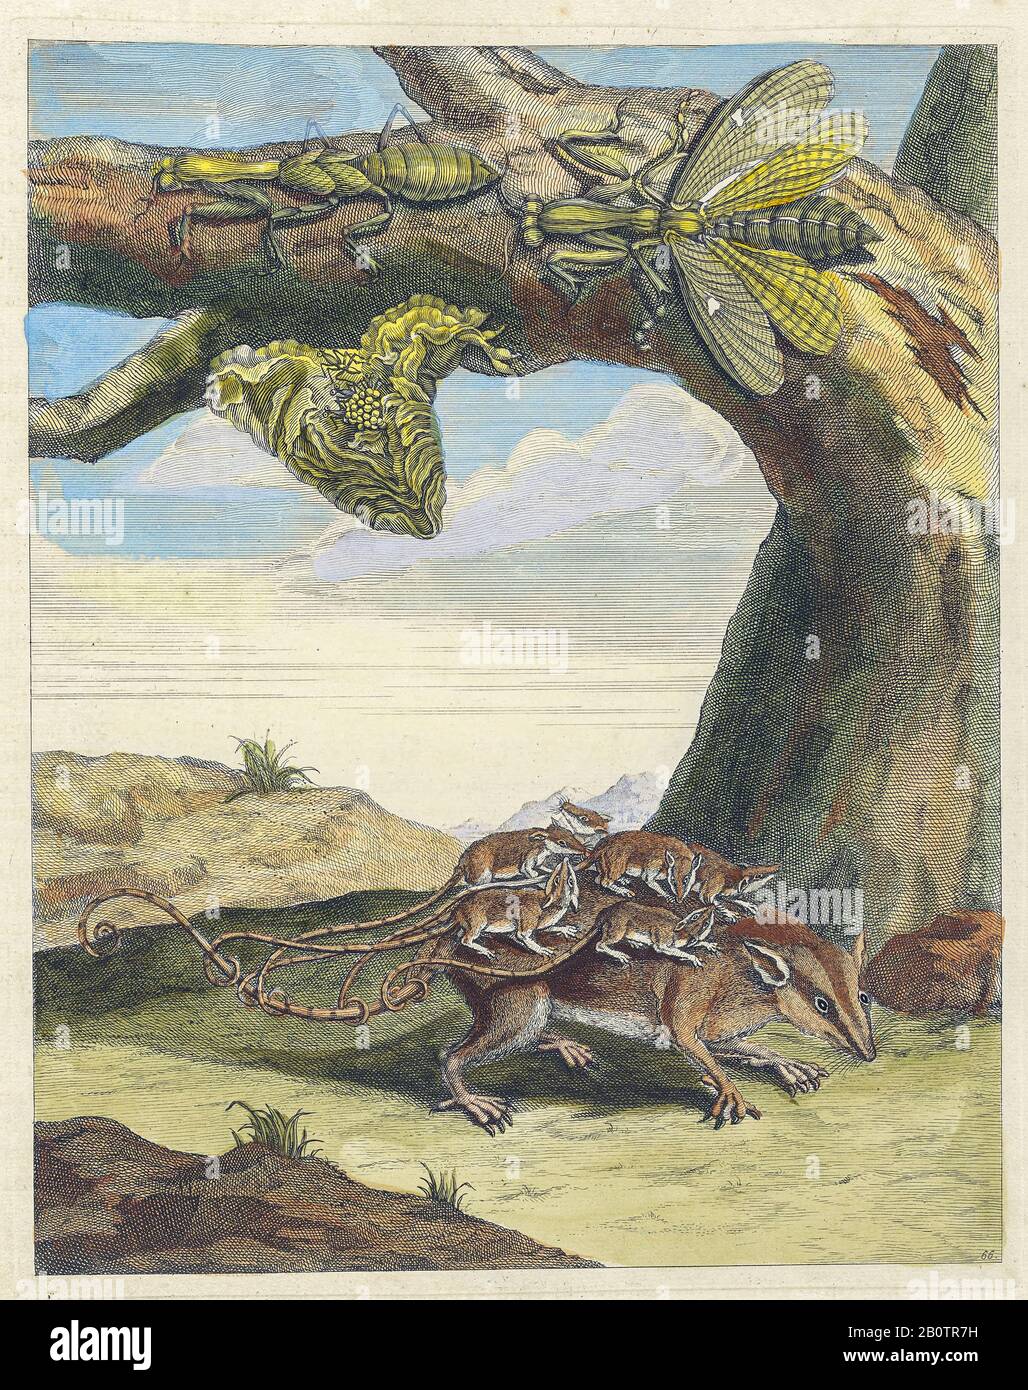 Opossum and mantid life cycle from Metamorphosis insectorum Surinamensium (Surinam insects) a hand coloured 18th century Book by Maria Sibylla Merian published in Amsterdam in 1719 Stock Photo